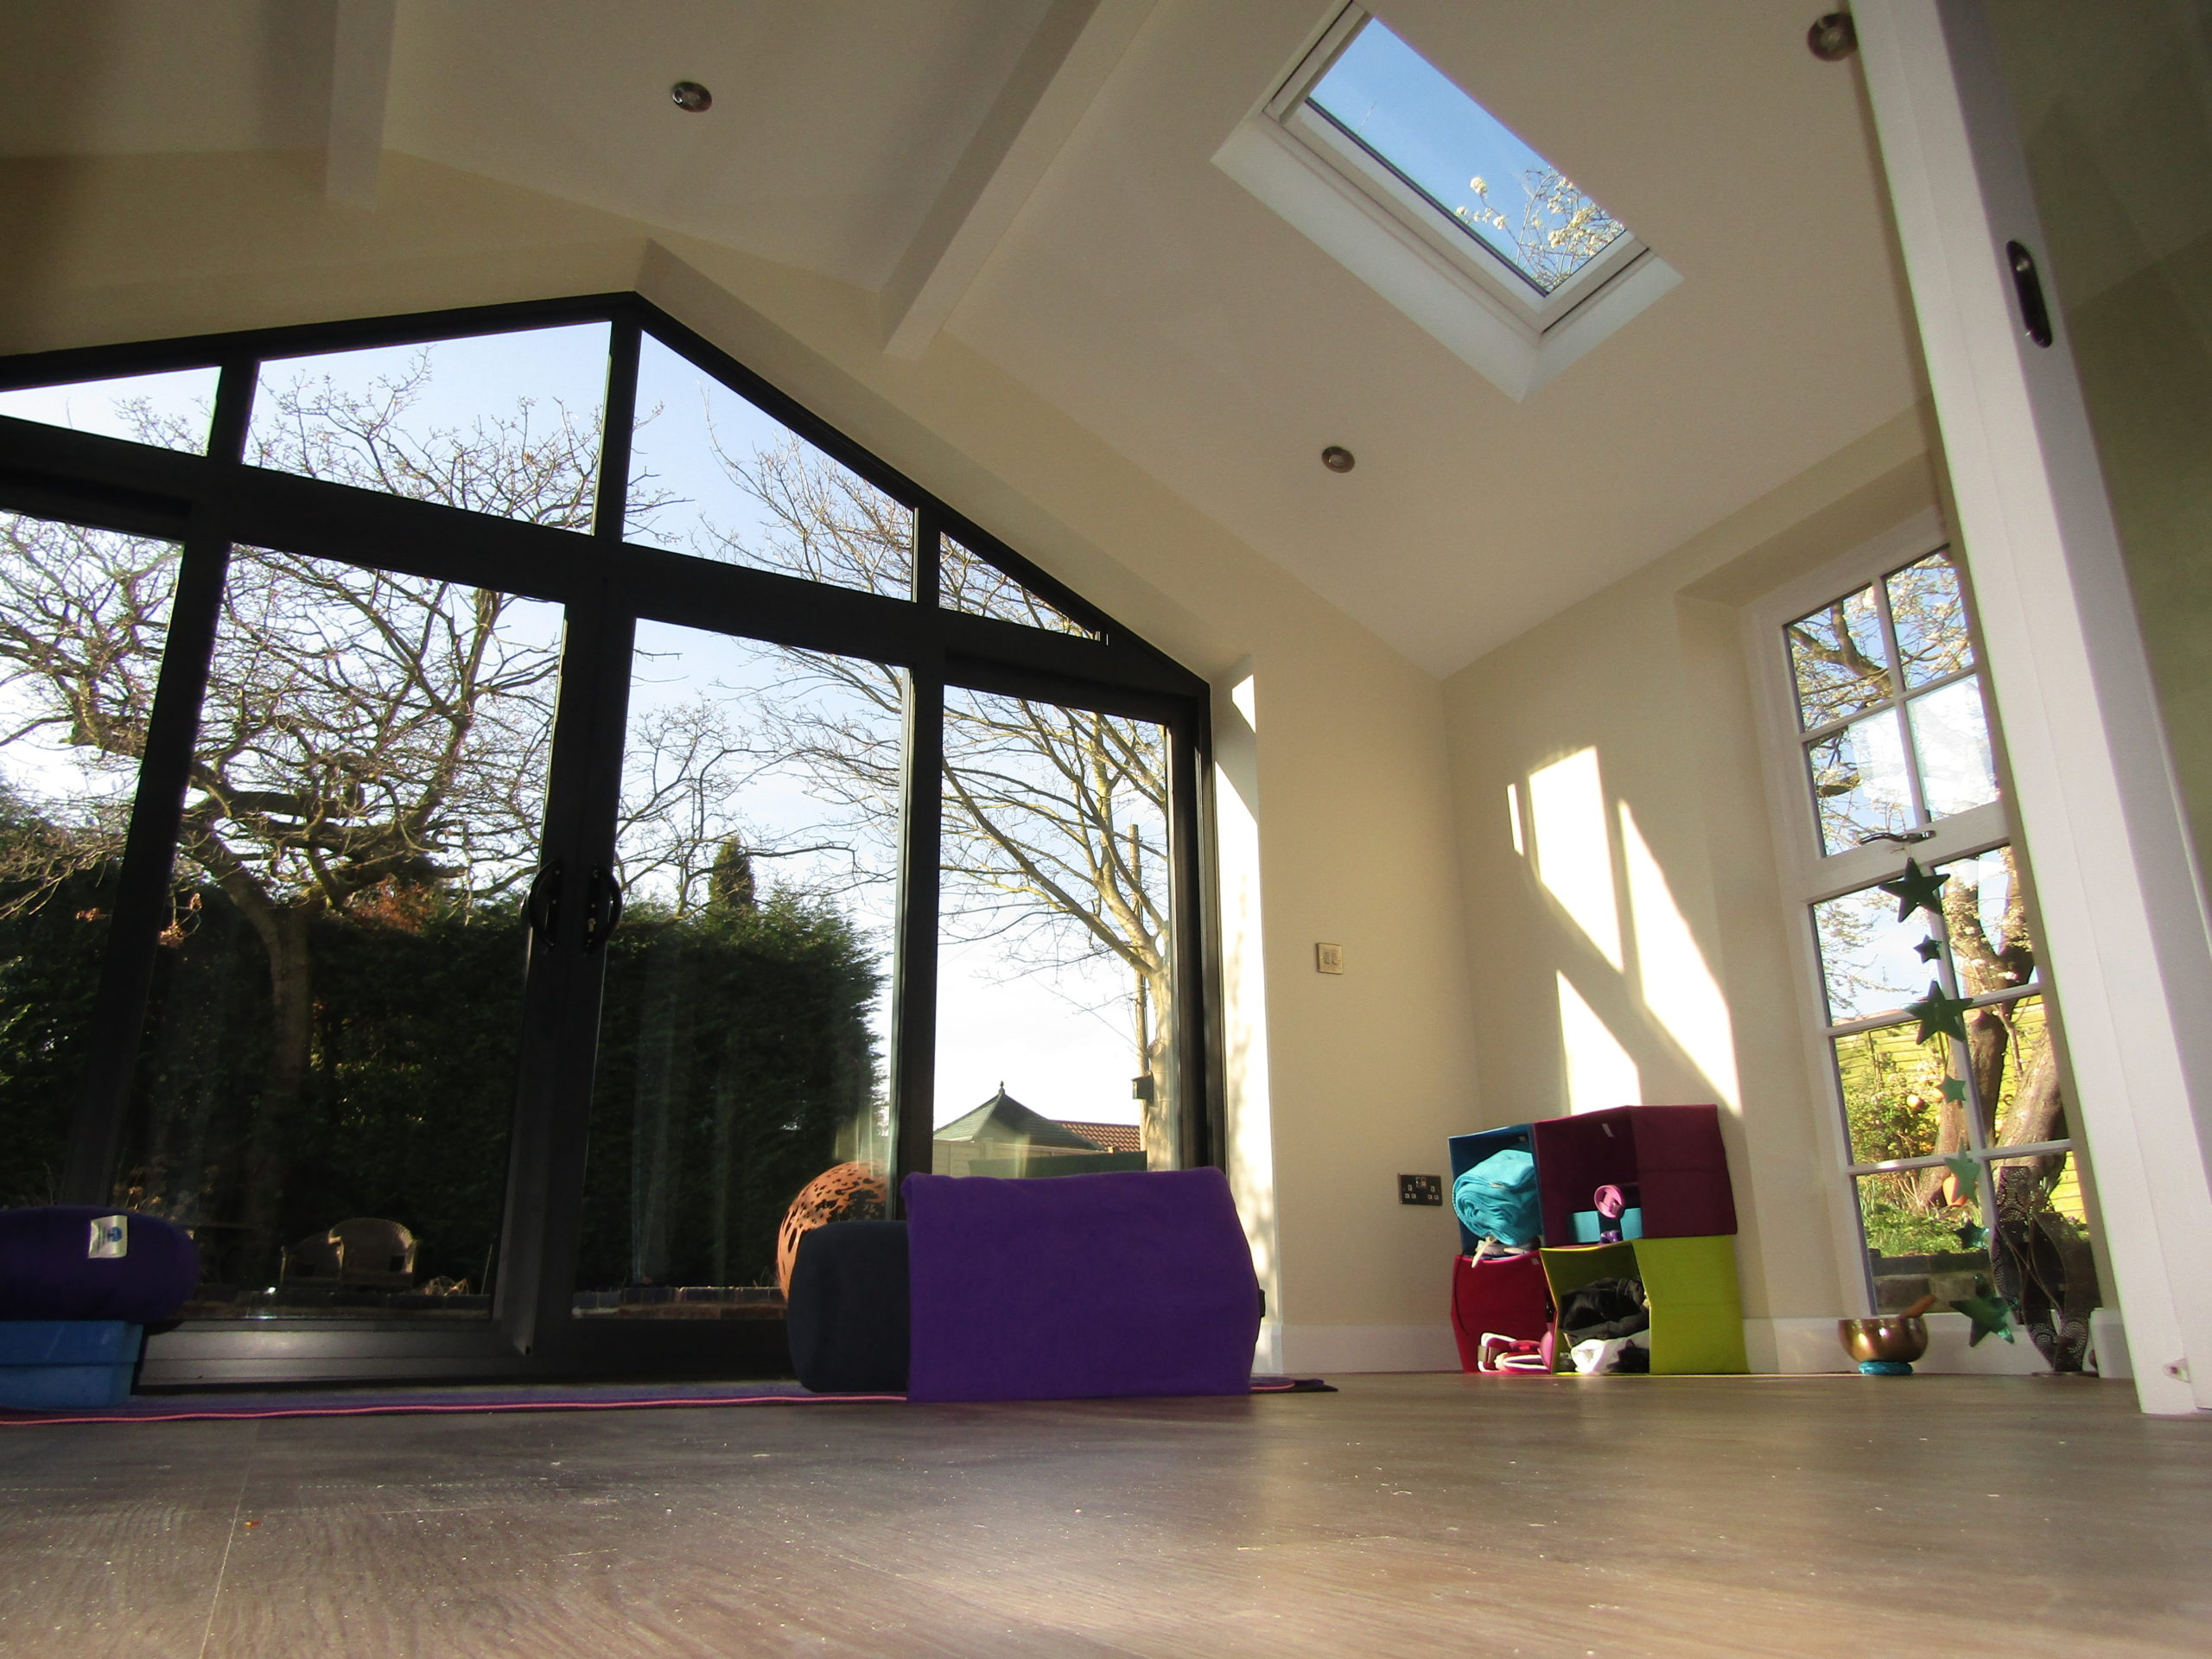 ceiling view of garage conversion with skylight